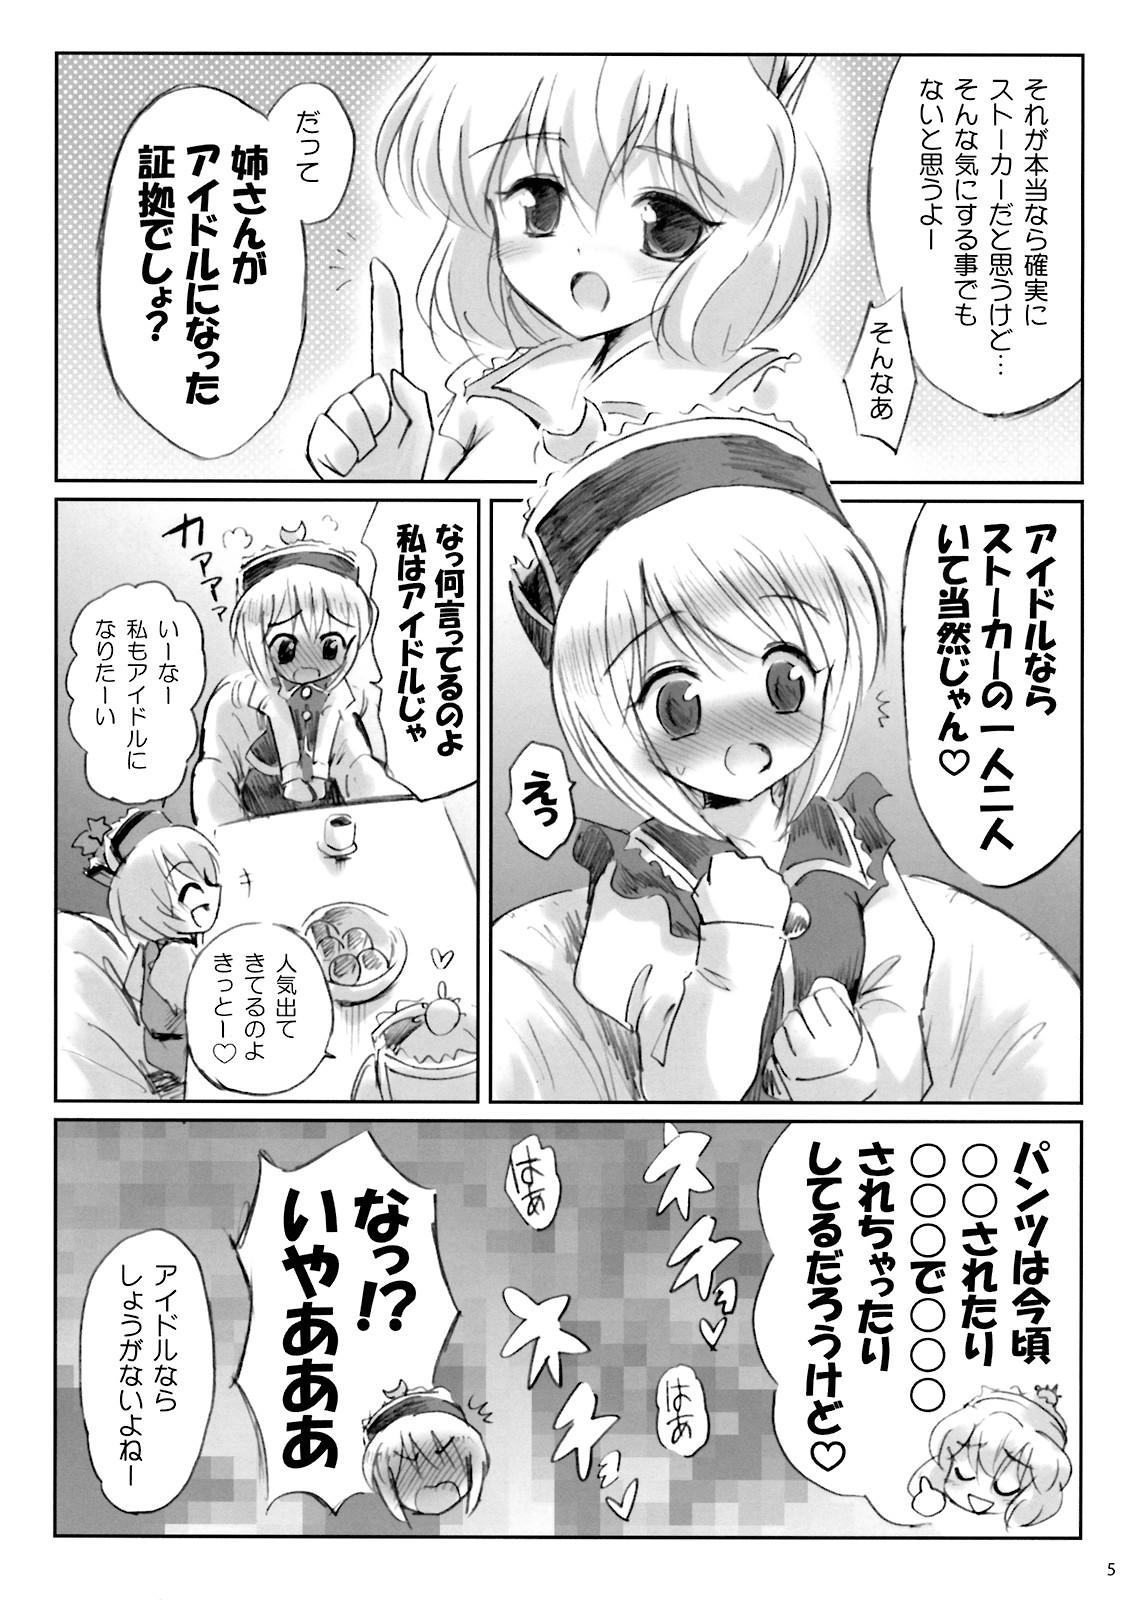 Humiliation Pov IDOLMASTER - Touhou project Cum Inside - Page 4